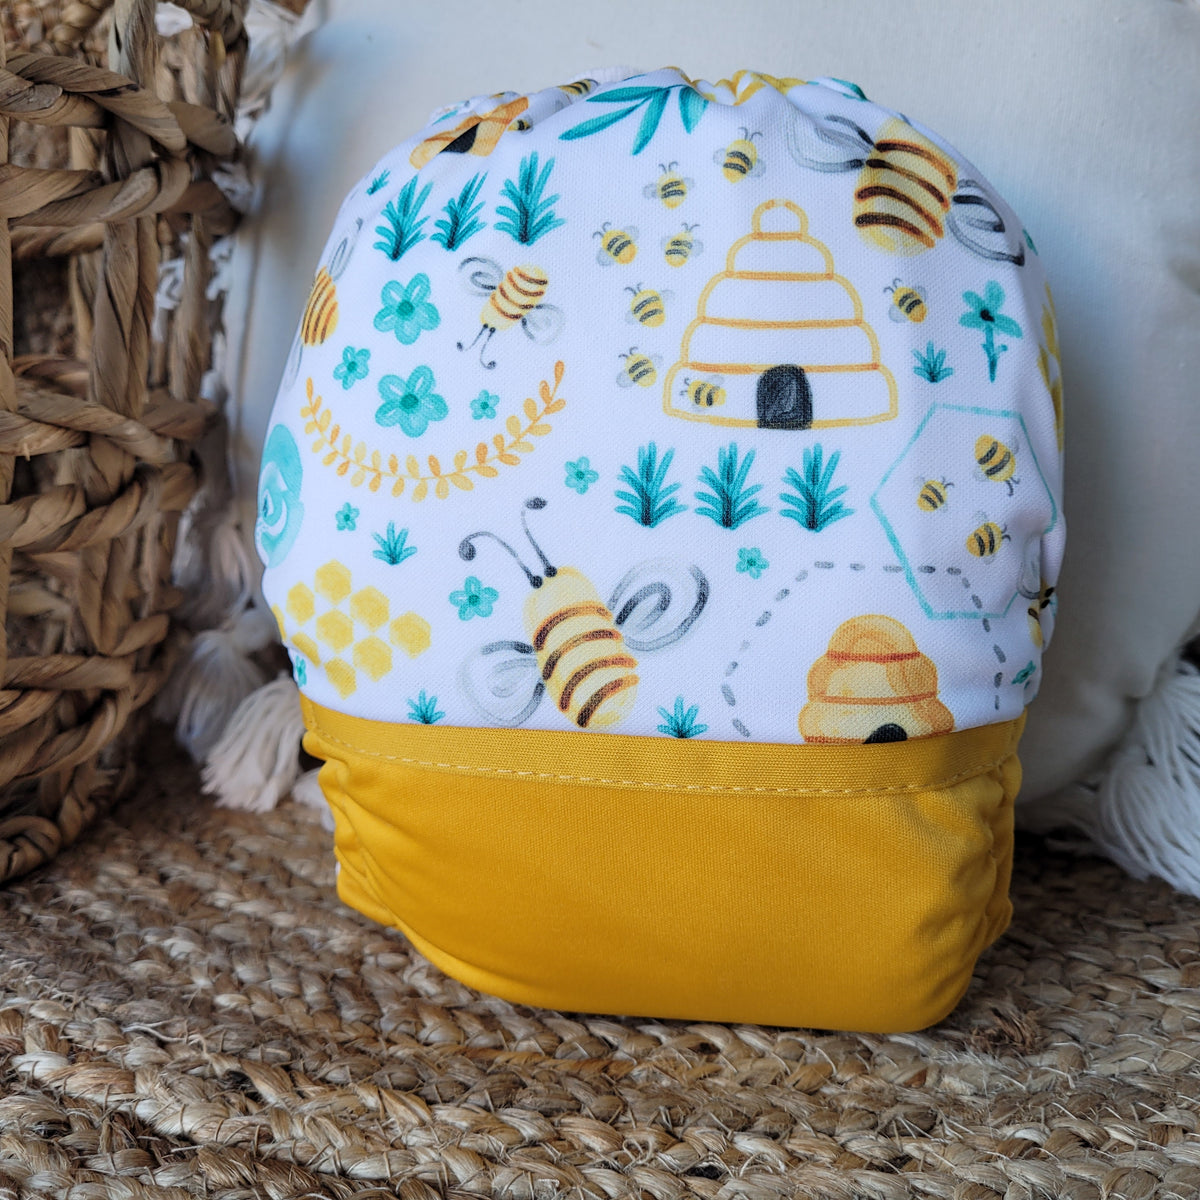 Pocket Cloth Diaper | NEWBORN size | Busy bees (wrap)